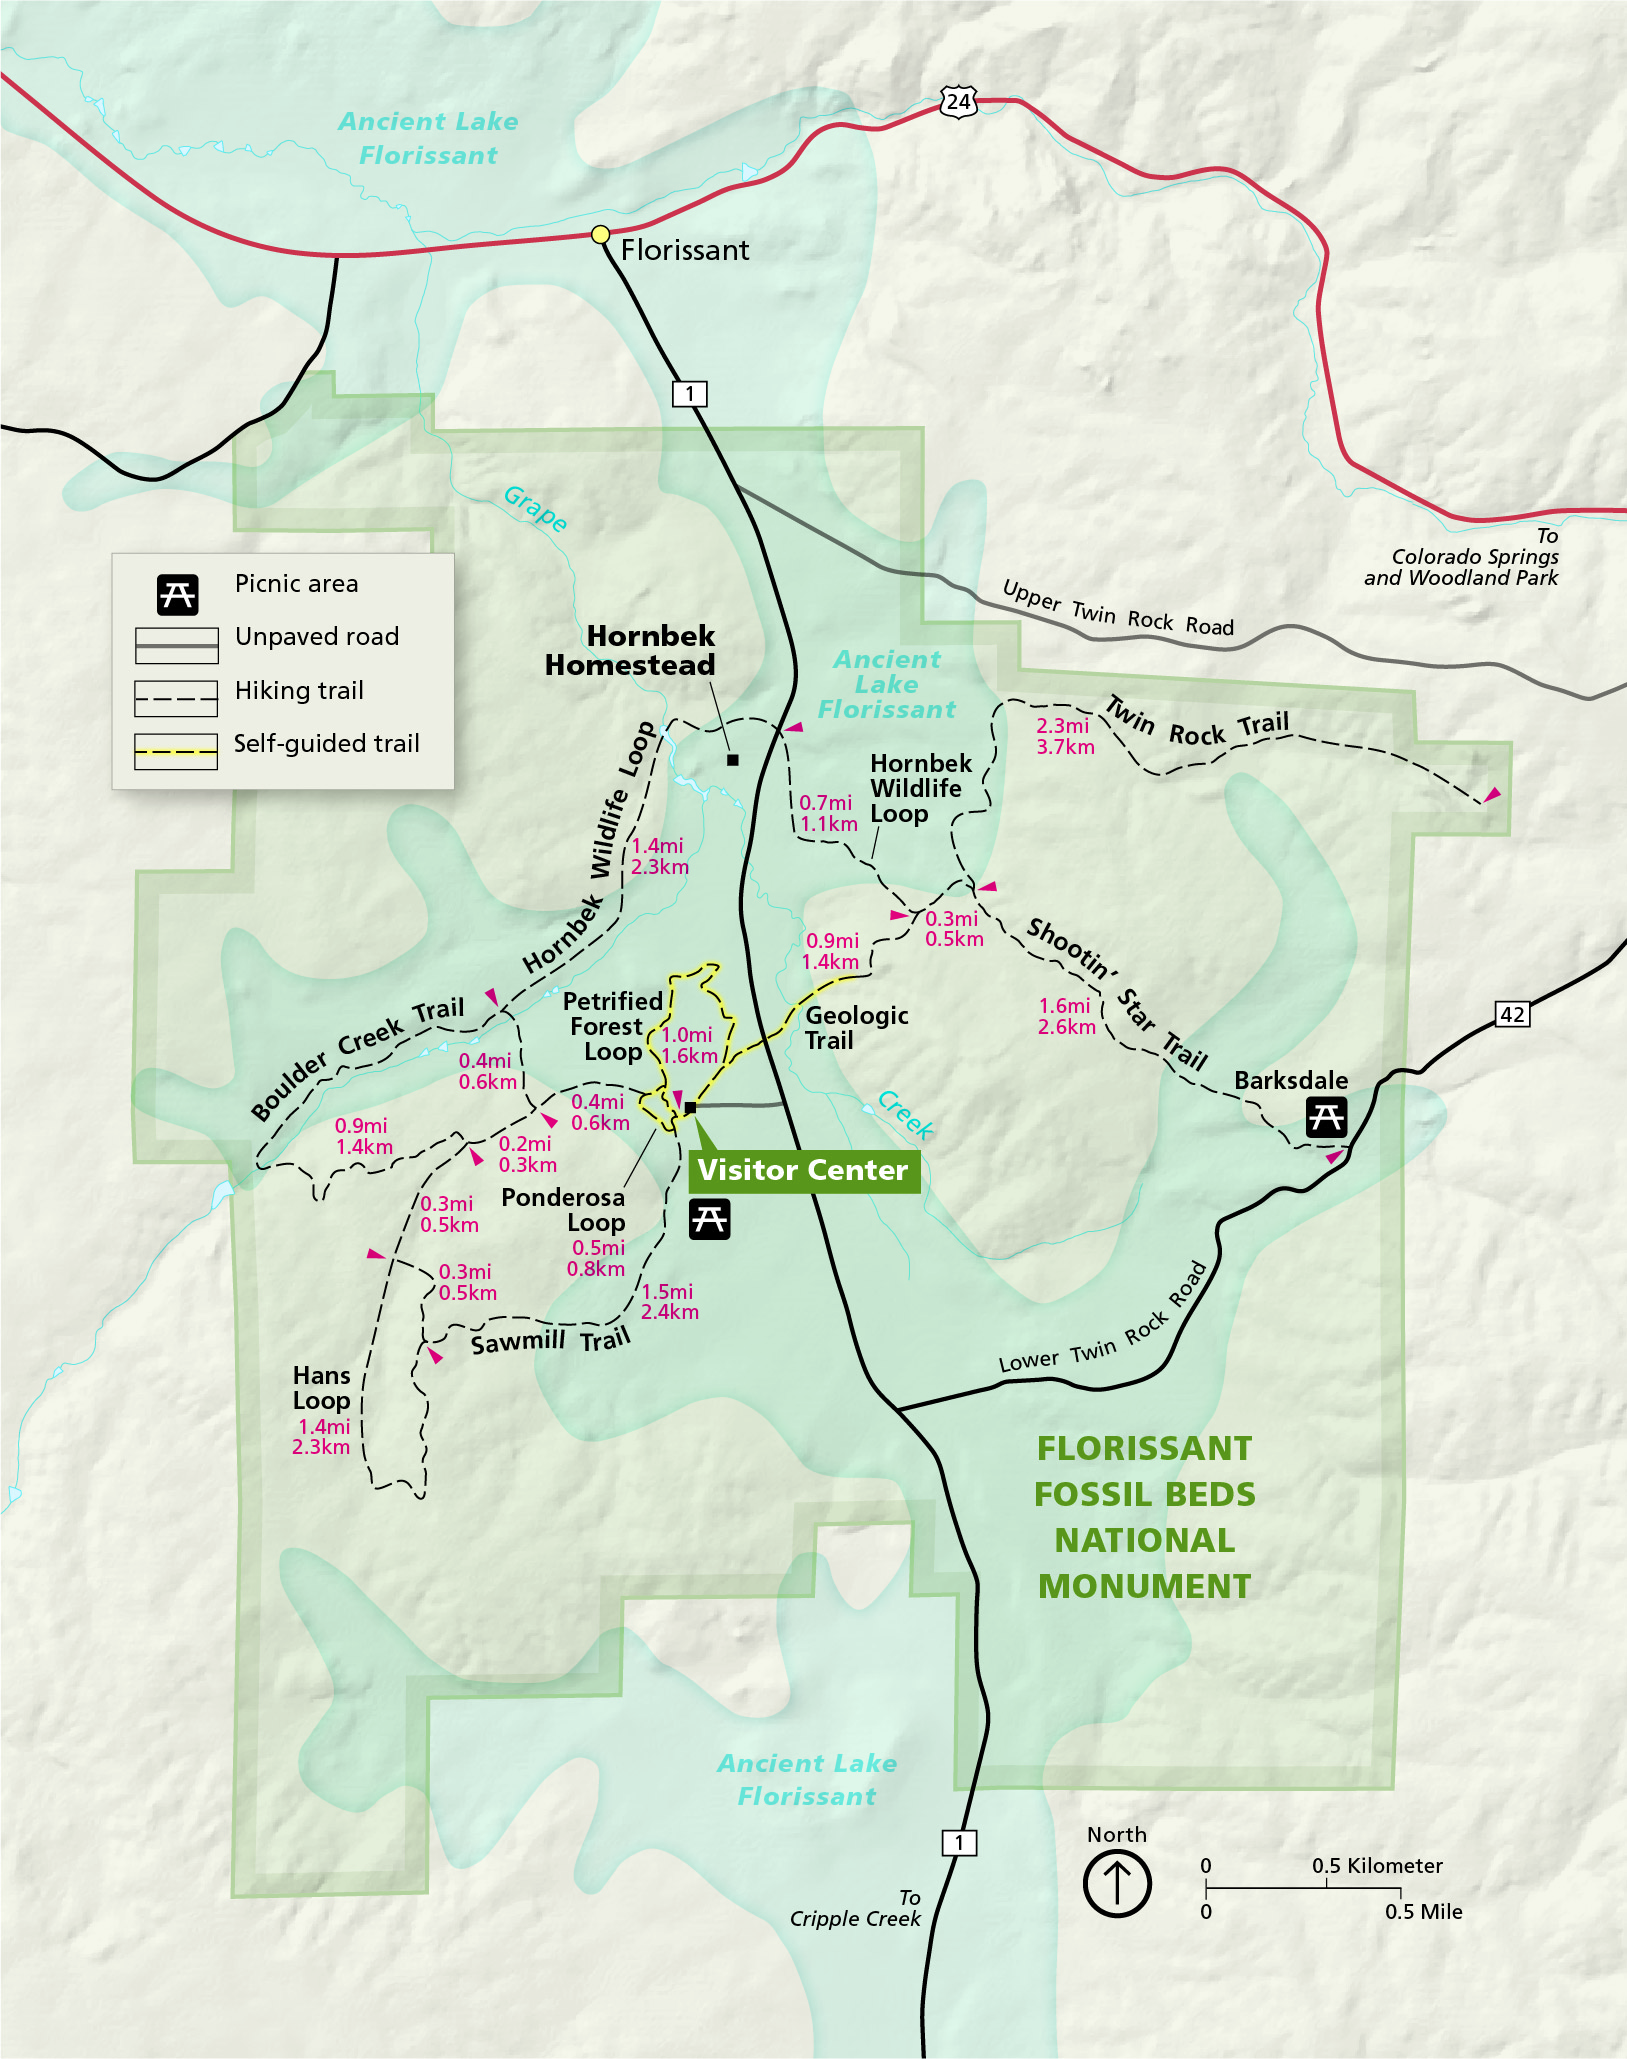 Florissant Fossil Beds Maps  - just free maps, period.